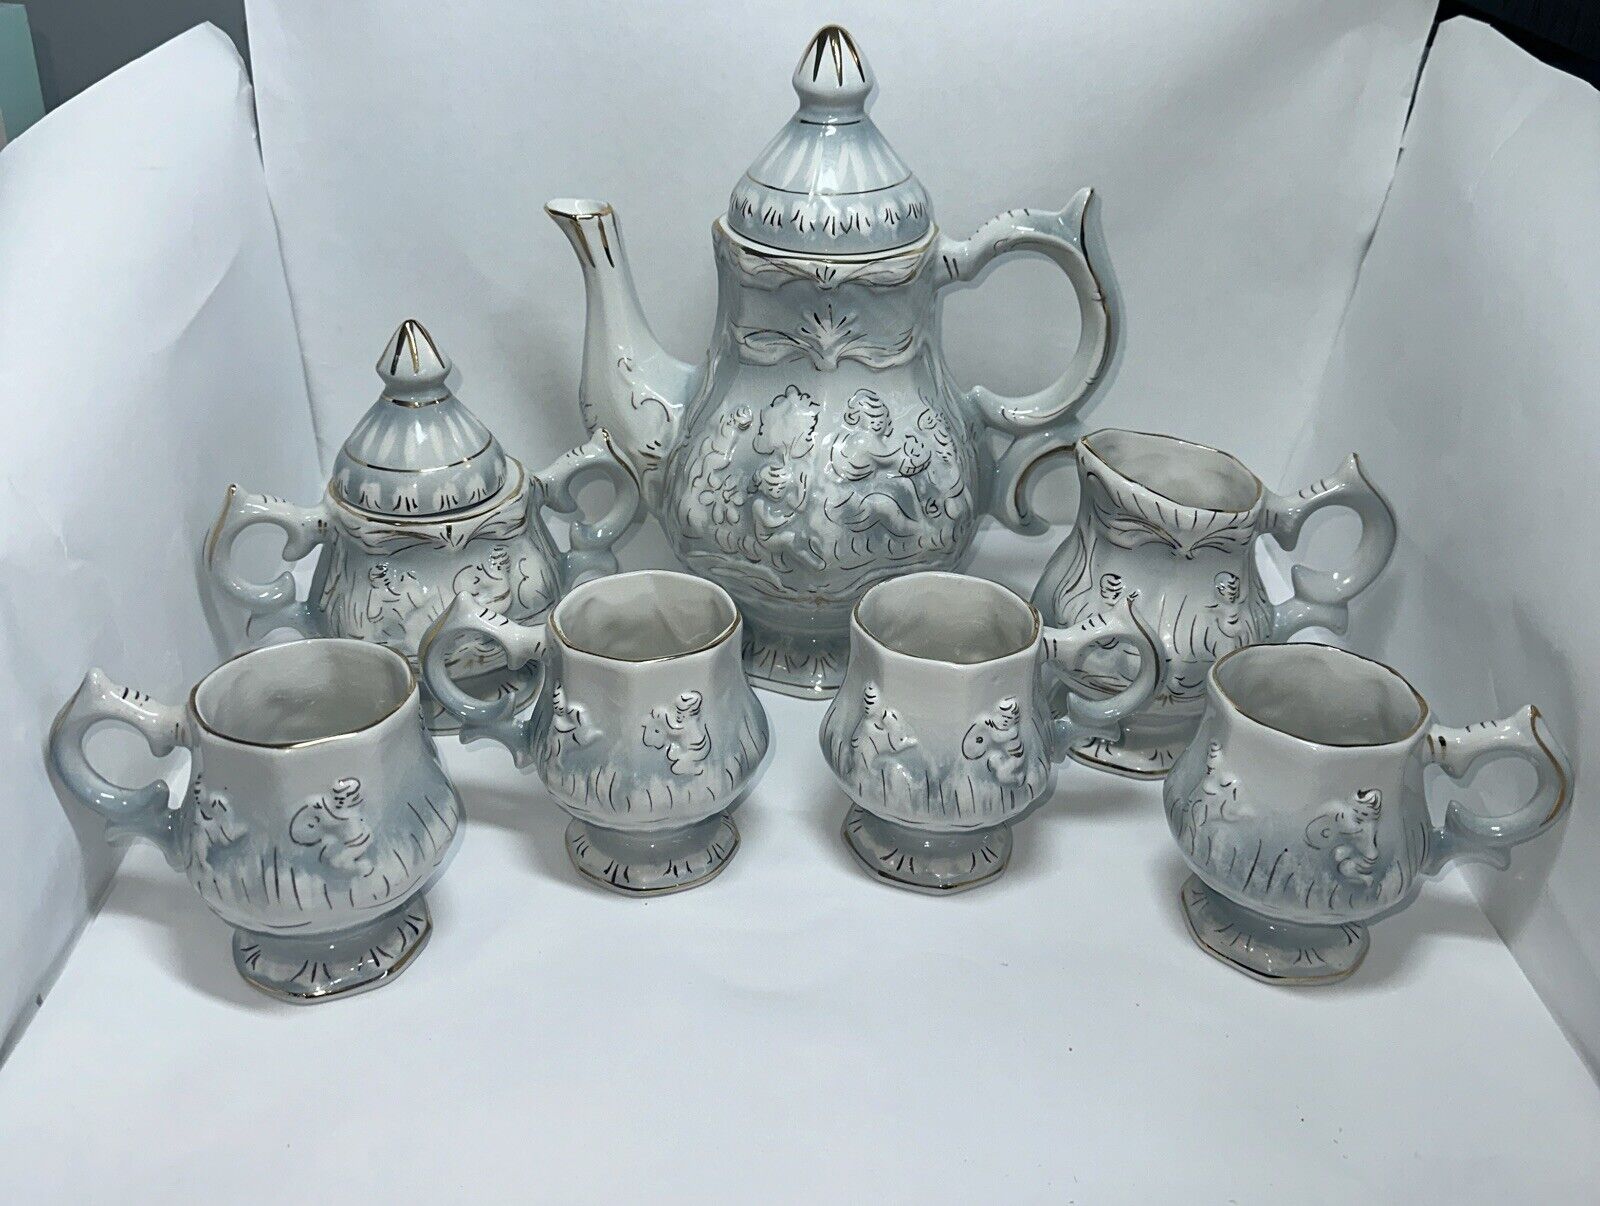 Antique Portugal Tea Set Light Blue With Gold And White Highlights Numbered 1002